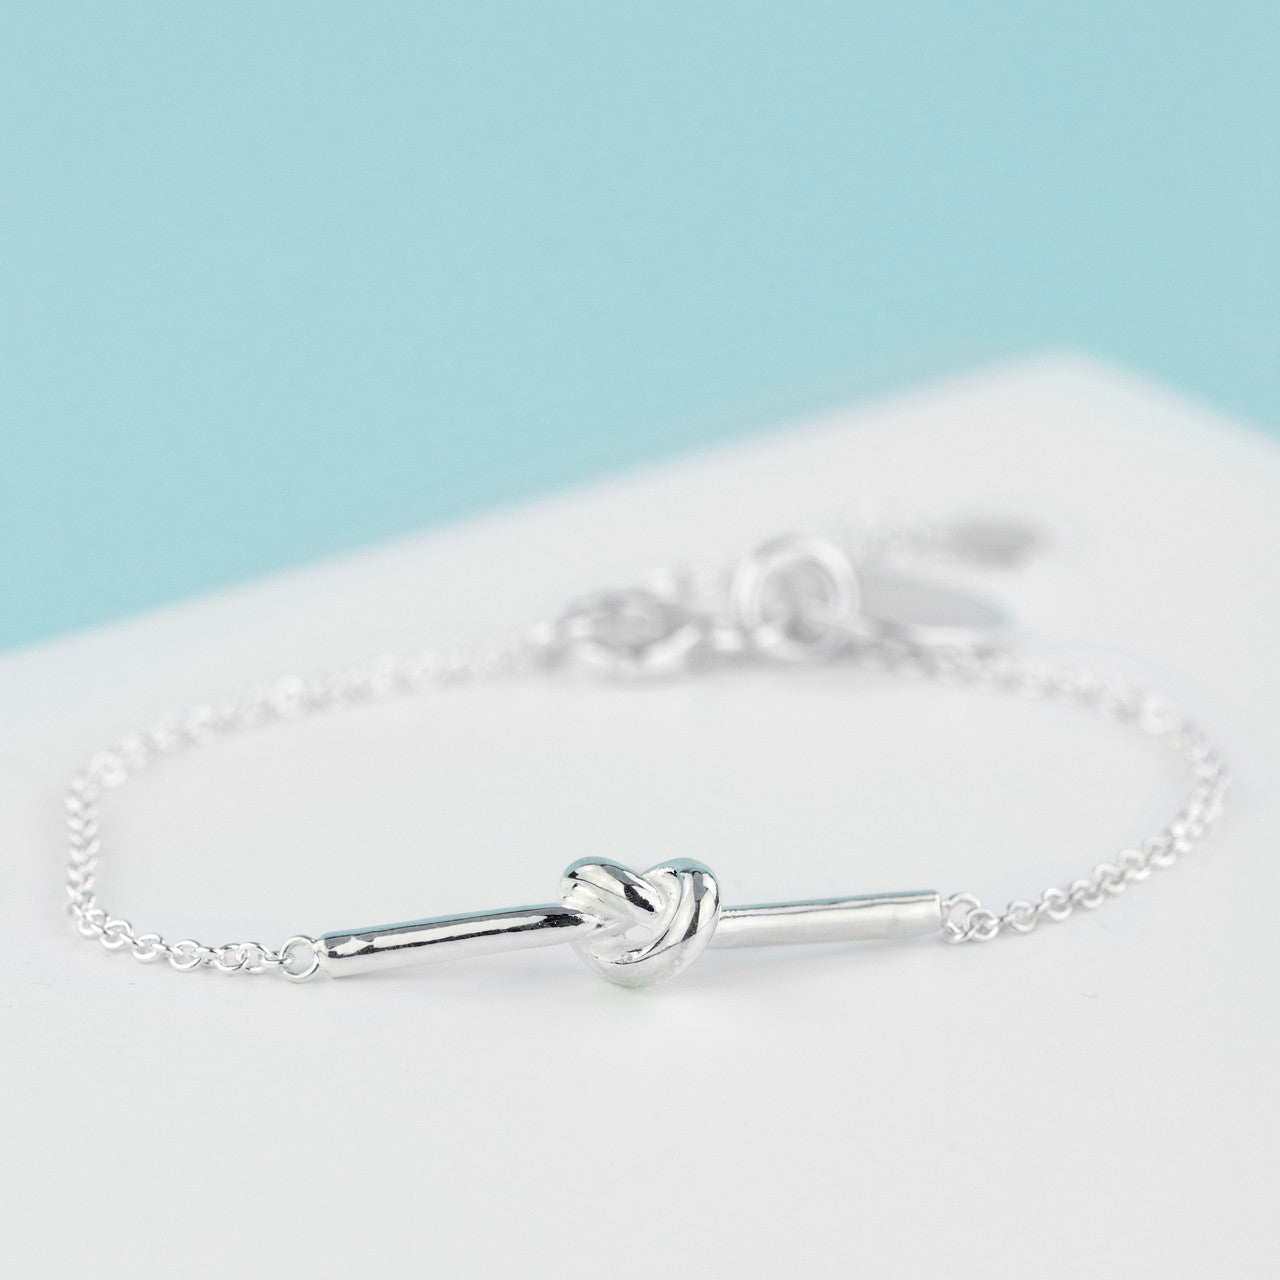 sterling silver bracelet with silver bar tied in knot finished with silver chain and sterling silver engraved disc with name or date of your choice. The 20mm extension chain ensures it fits all wrists